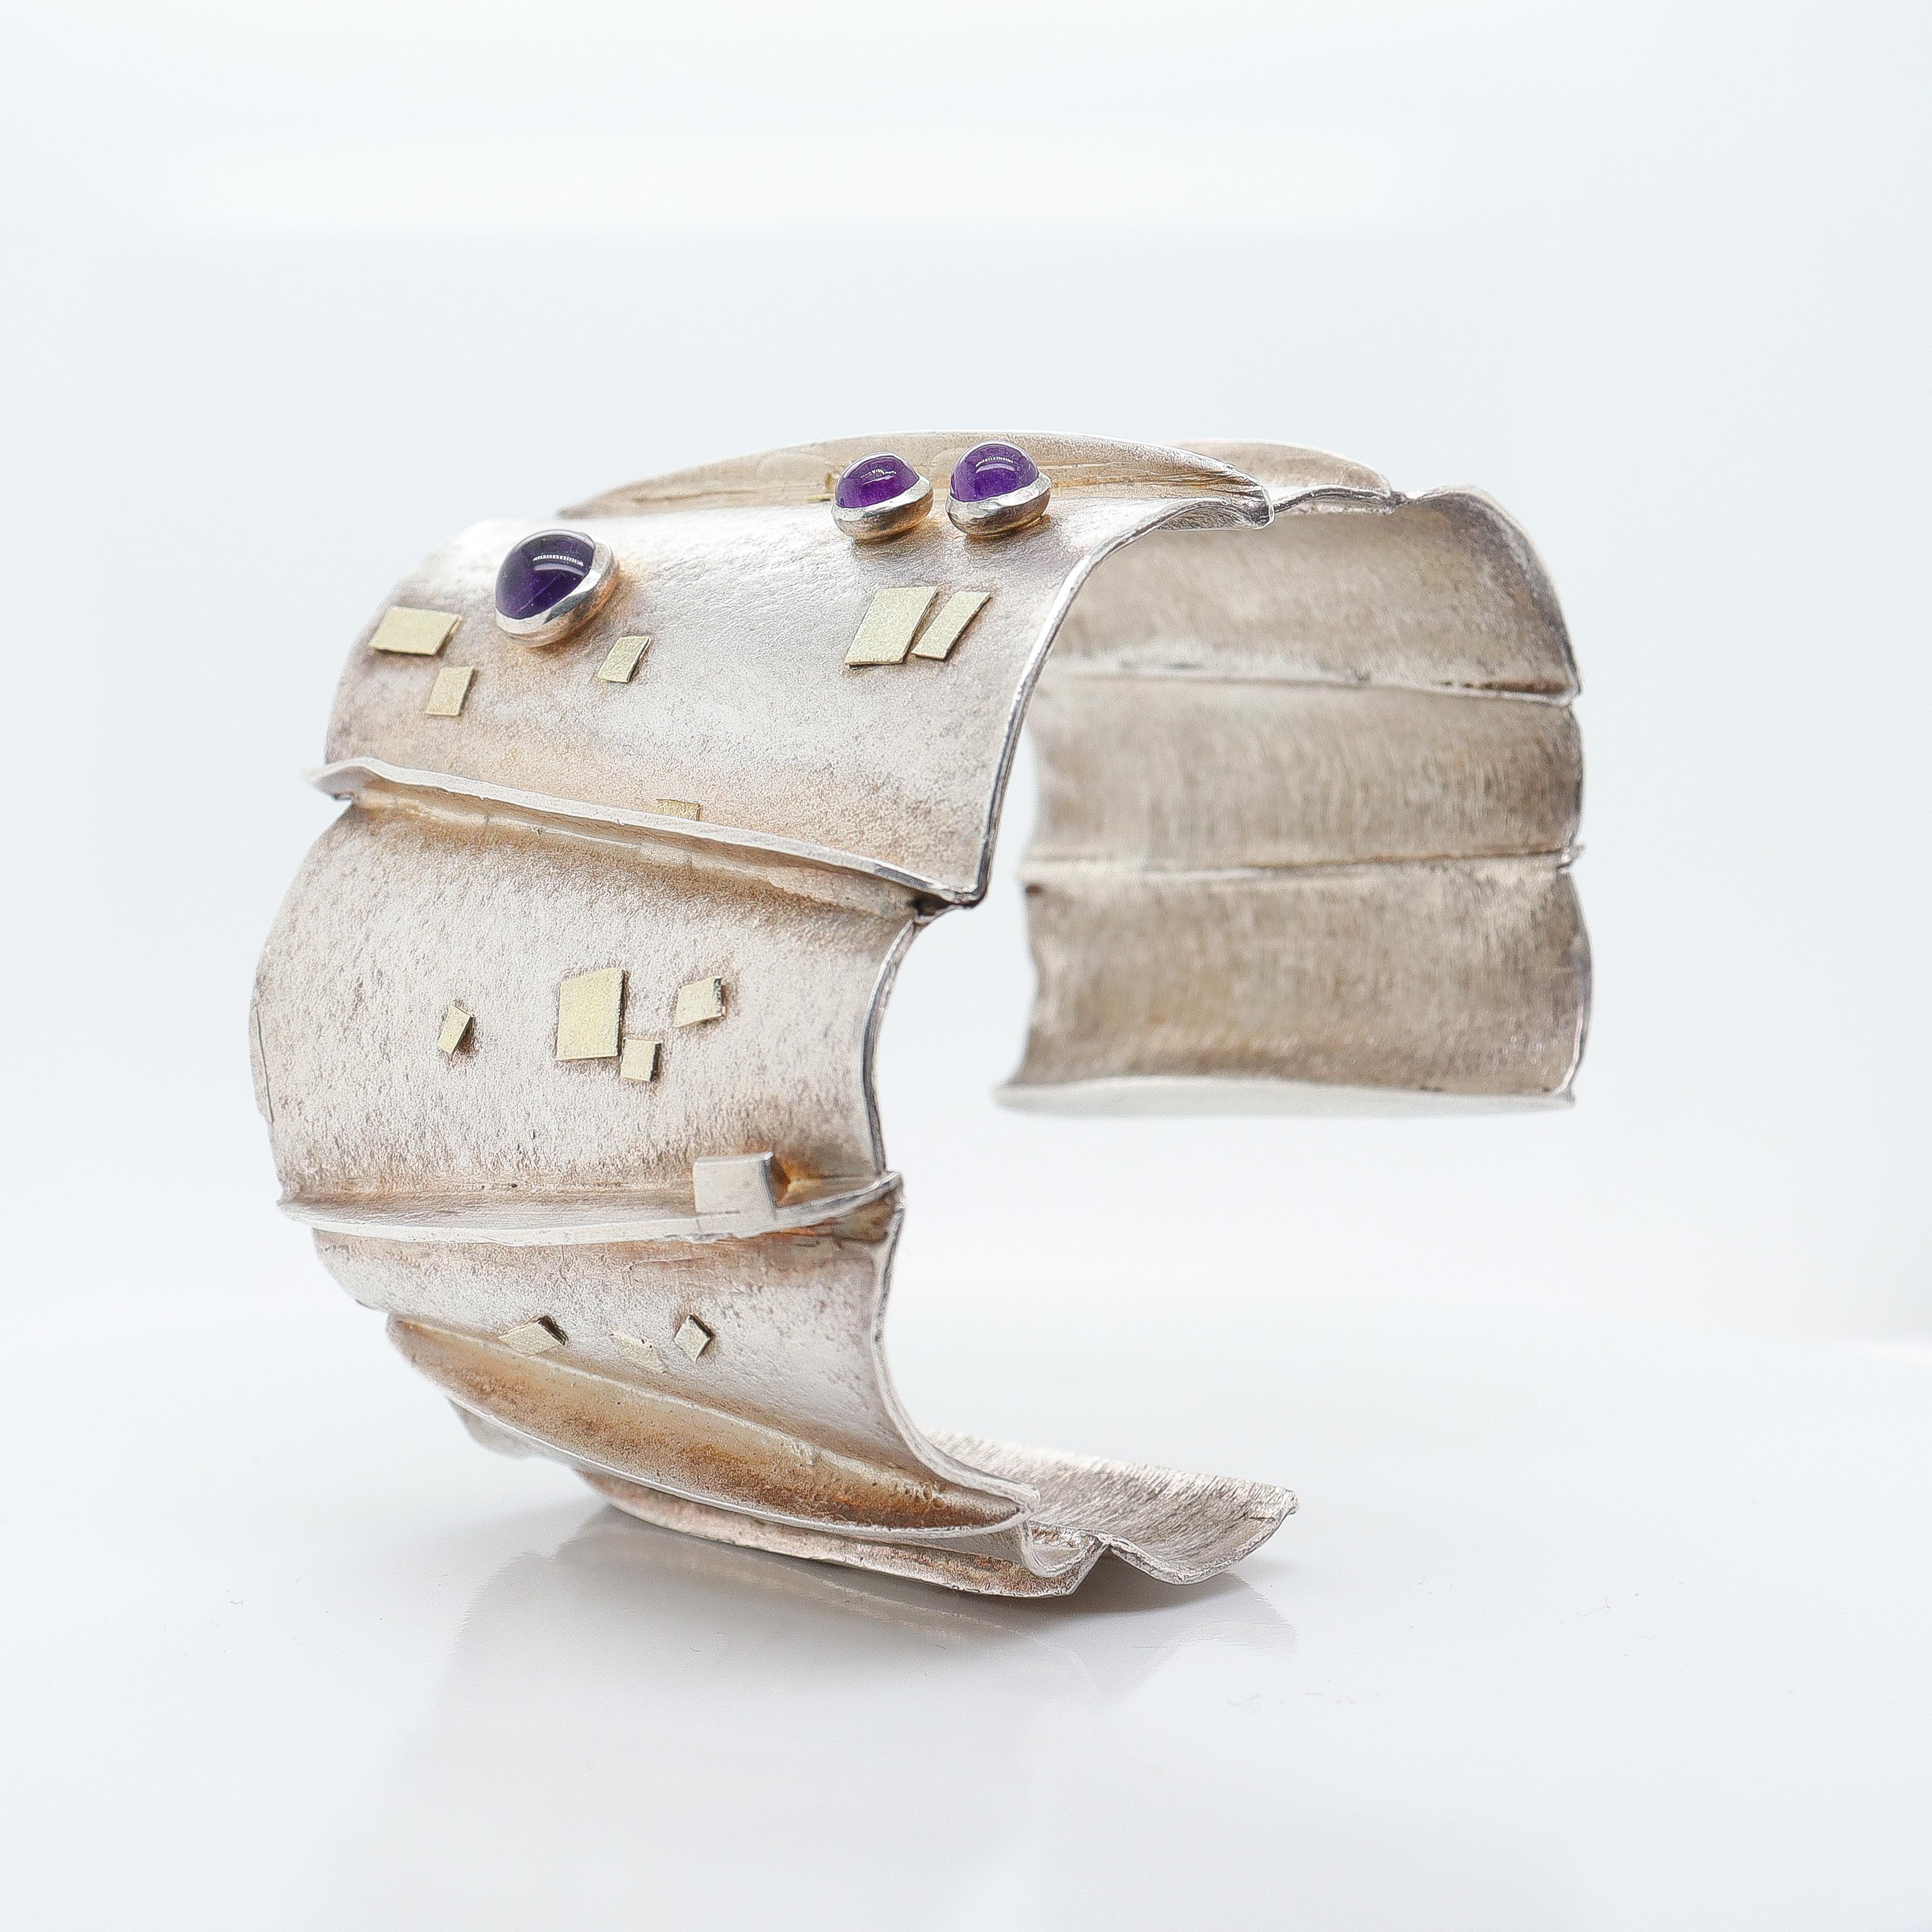 Modernist Silver, Gold, & Amethyst Cuff Bracelet Attributed to Enid Kaplan For Sale 4